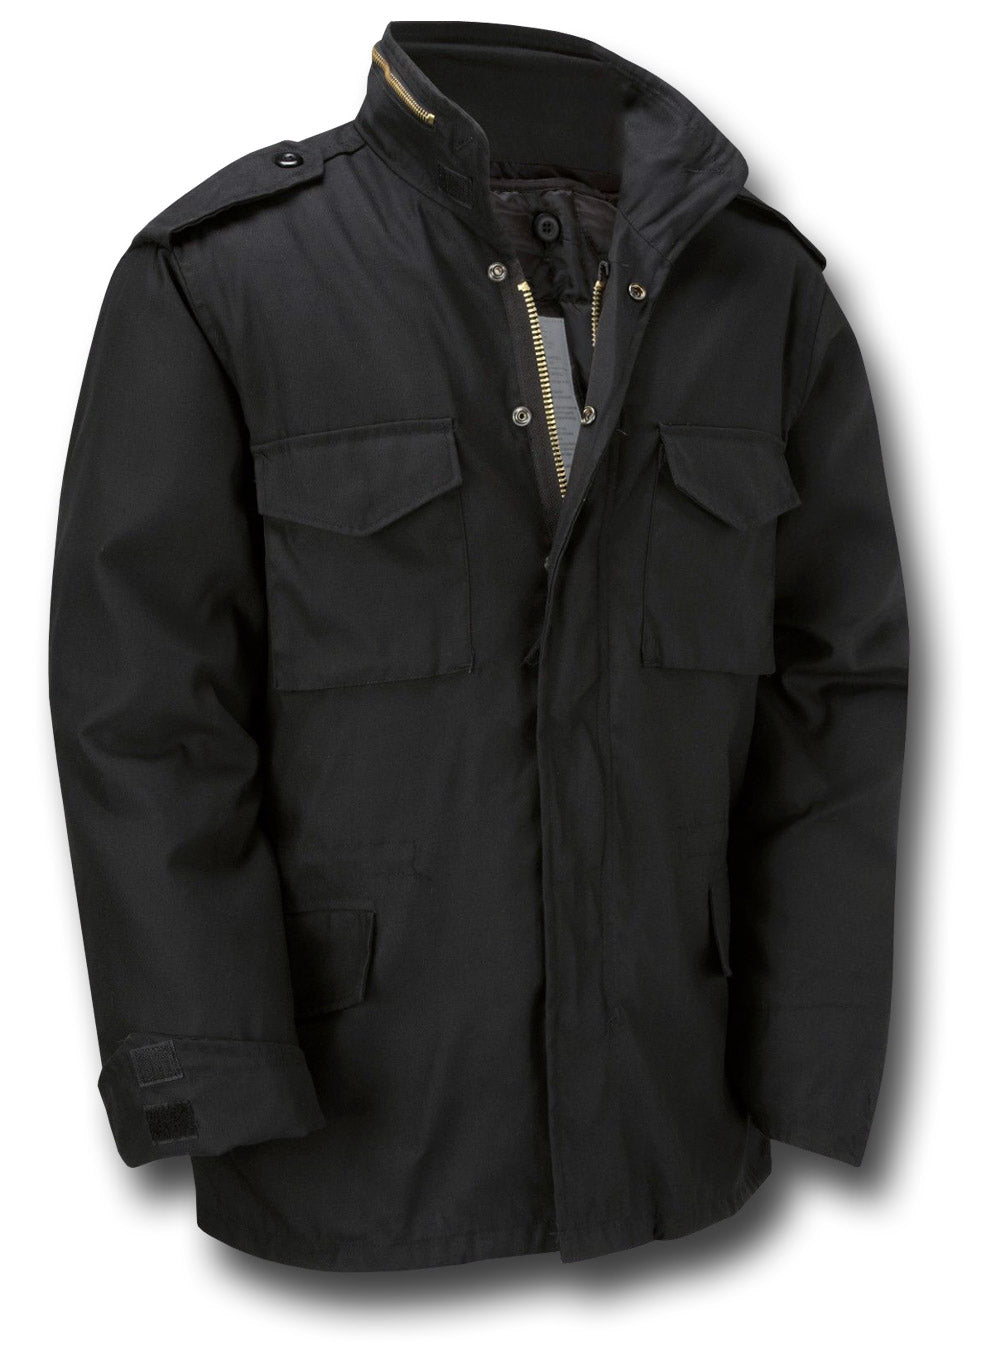 M65 STYLE JACKET WITH LINER - BLACK